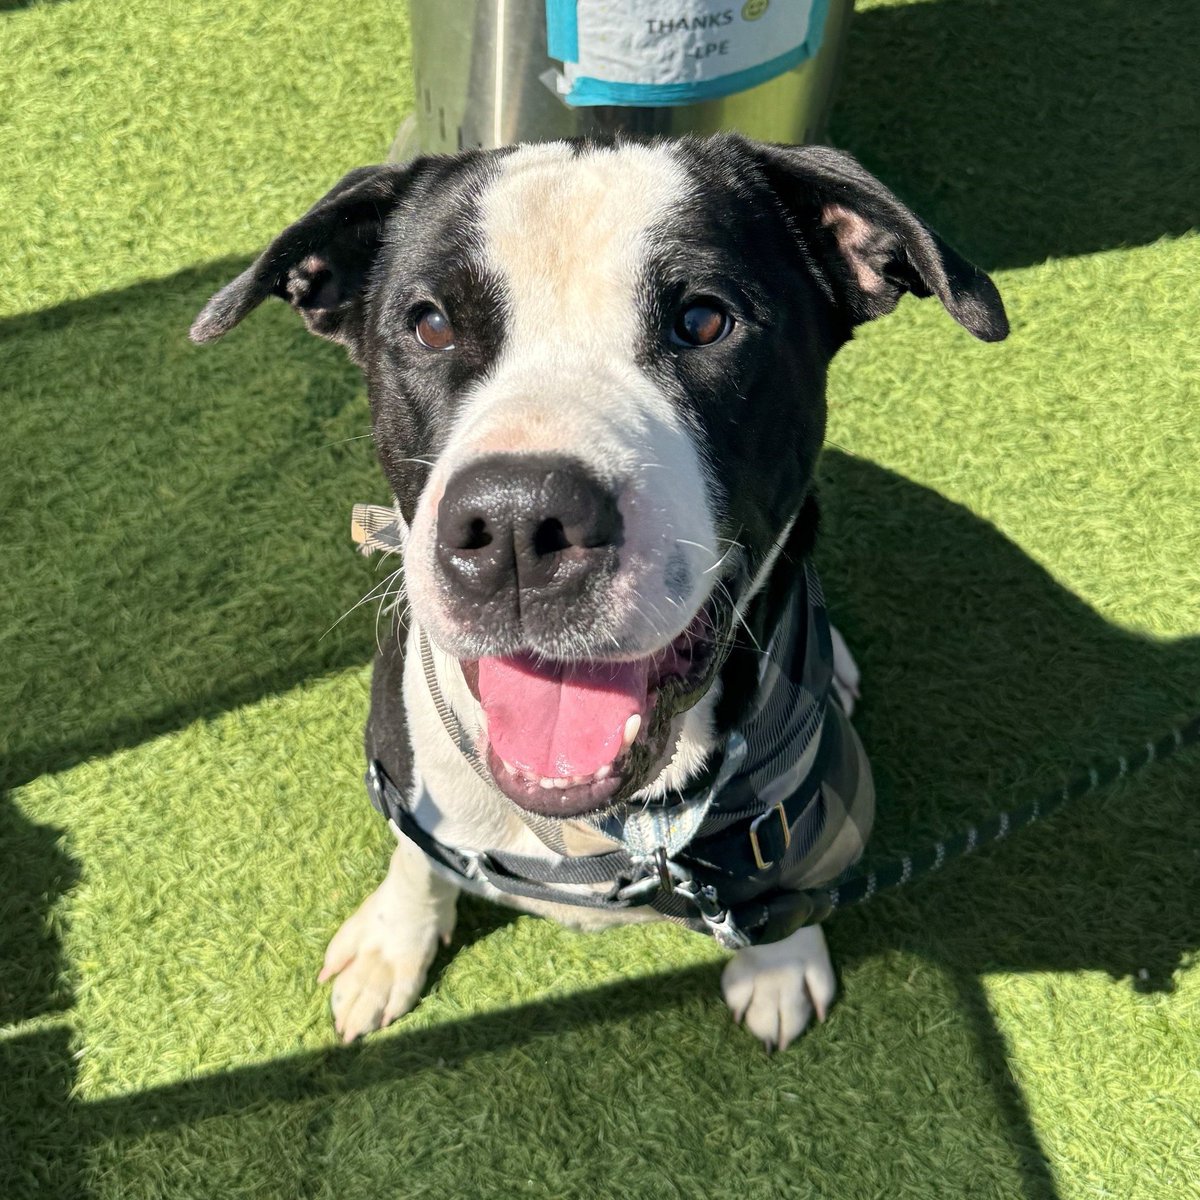 Percival has the ultimate puppydog eyes! This adorable guy loves meeting new people, playing with other dogs, and going on adventures. He would love an active family that includes him in their activities, then provides lots of snuggles back at home. bit.ly/3Prxx5A